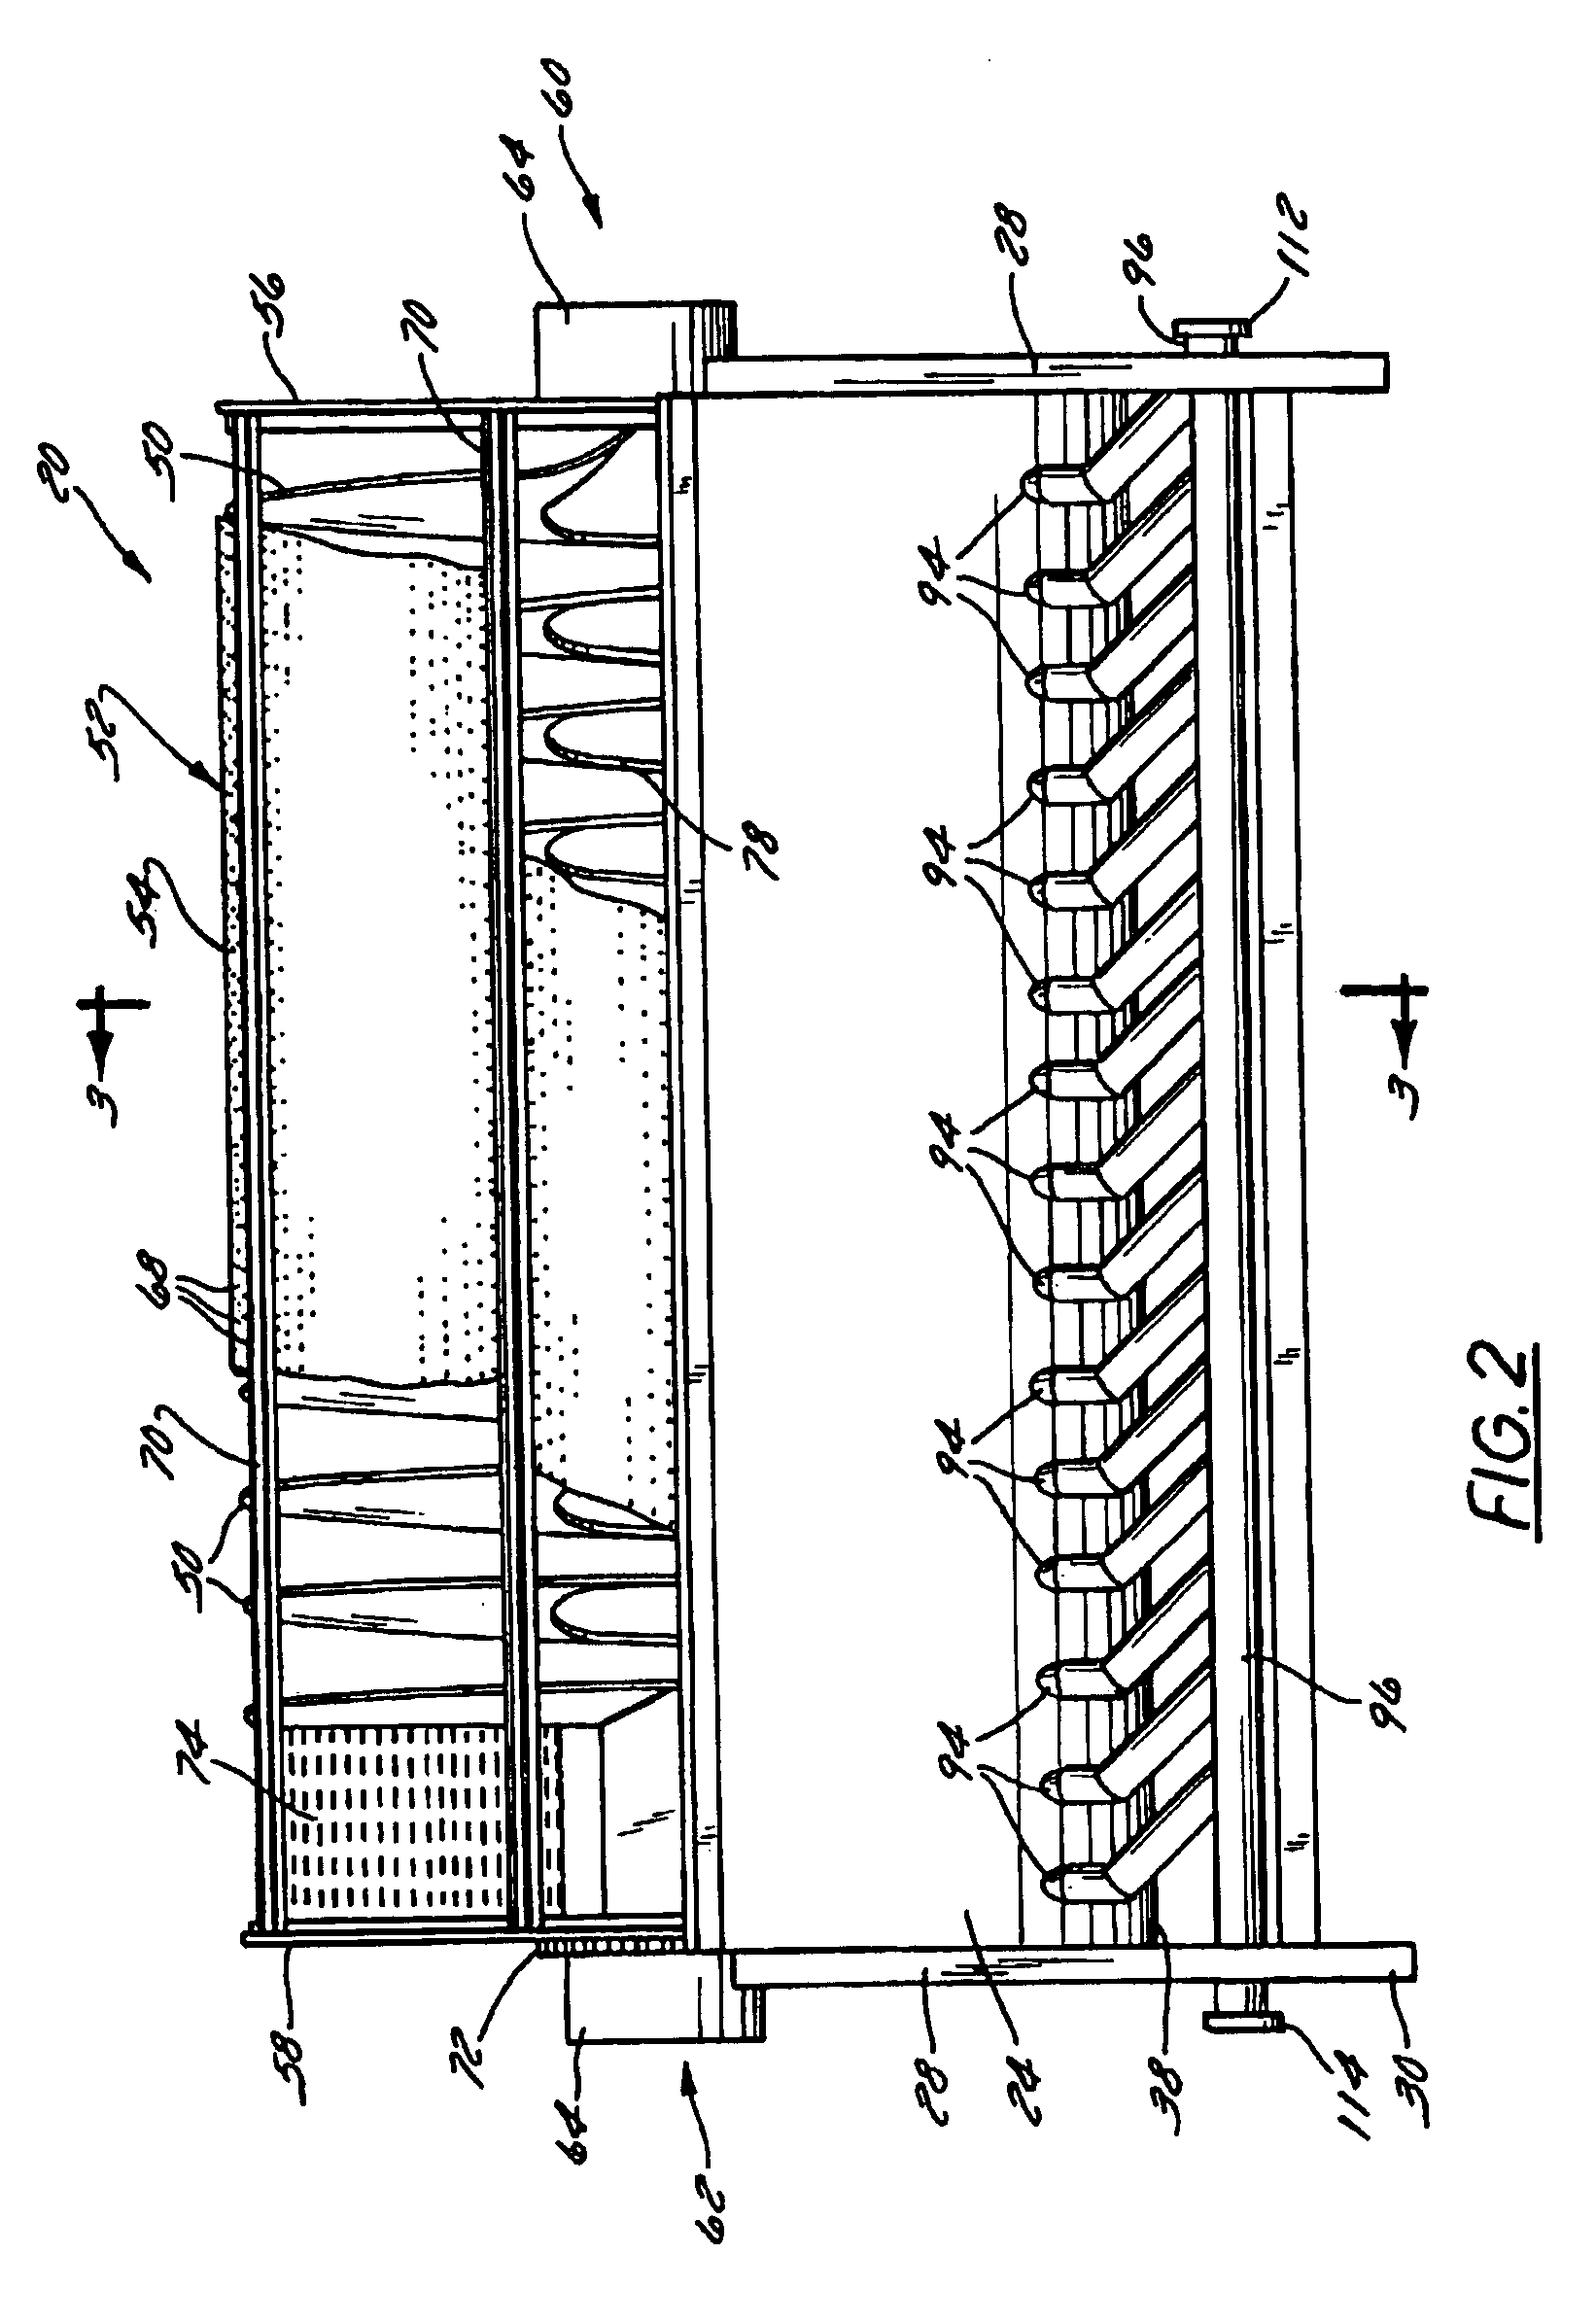 Method for processing food product